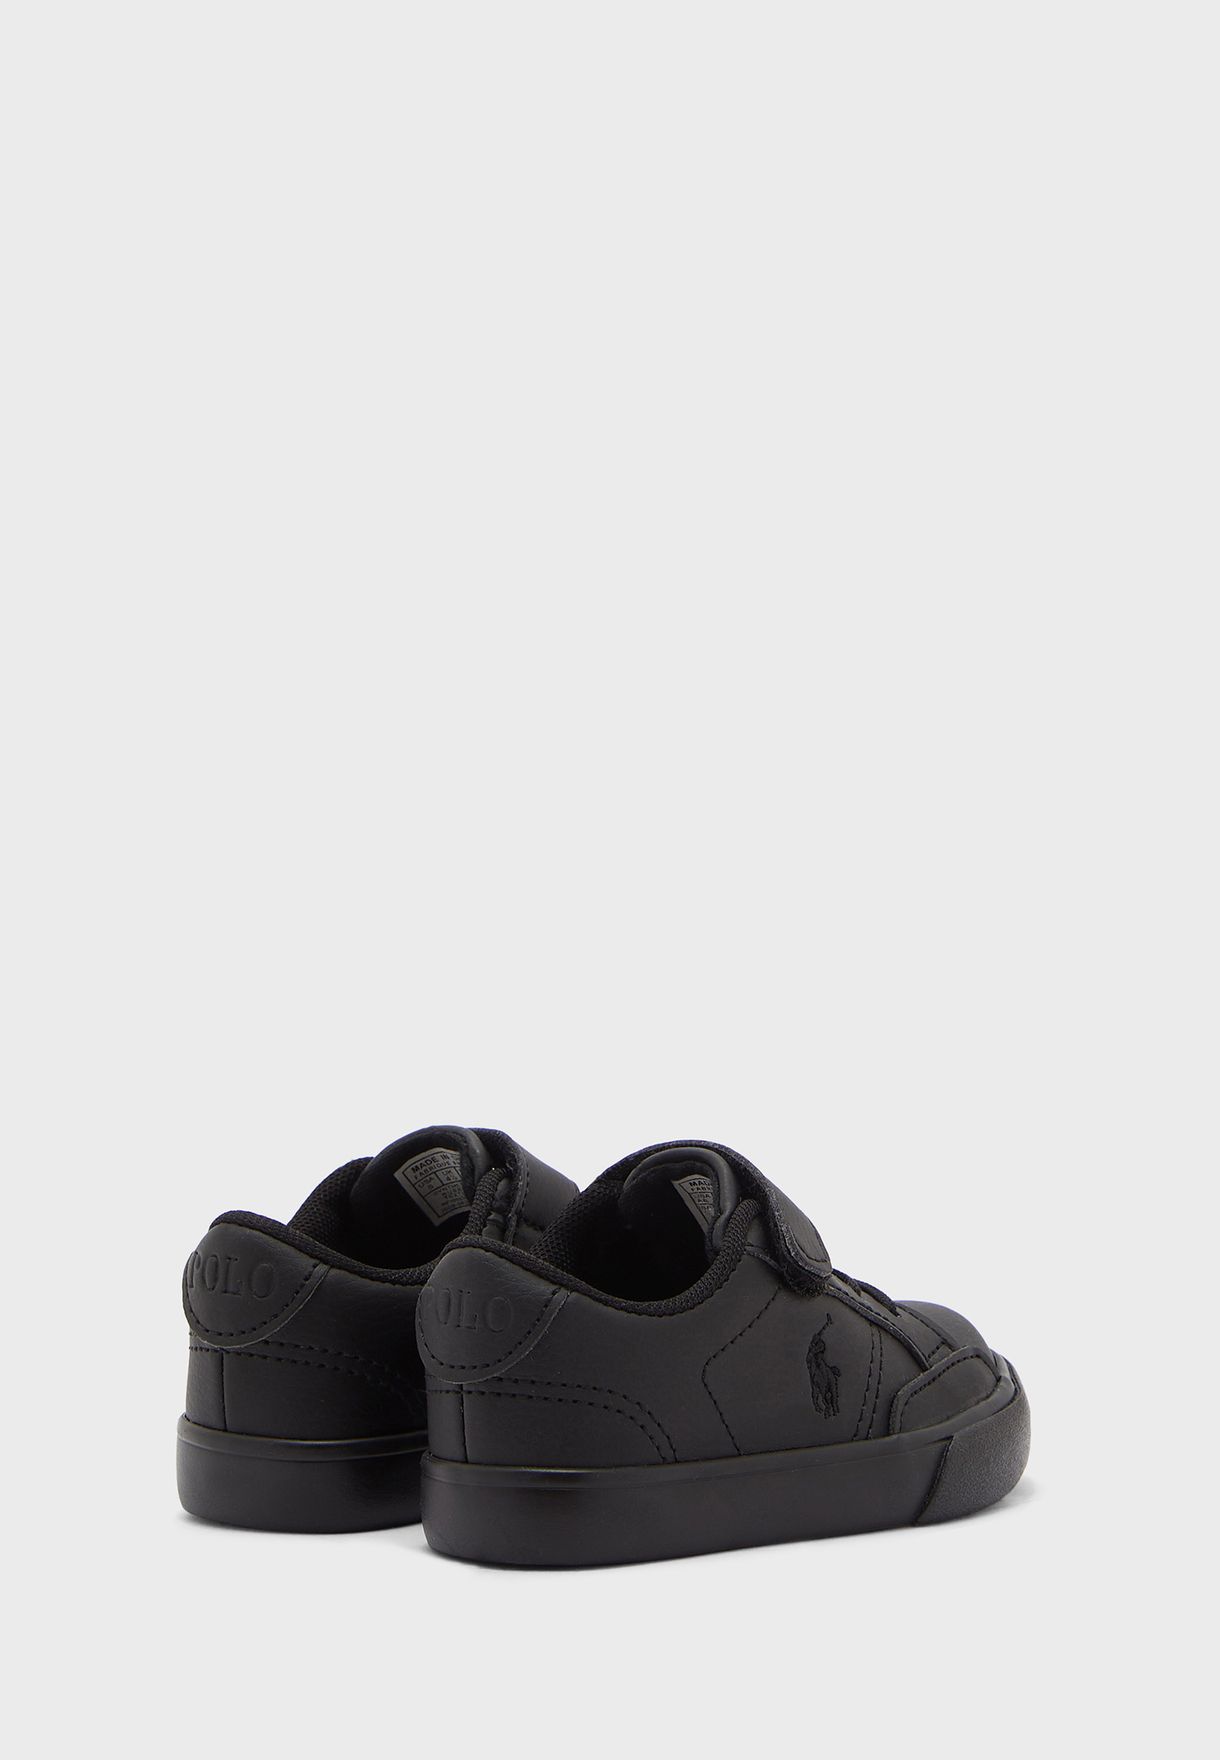 Kids Theron Iv Ps Sneakers